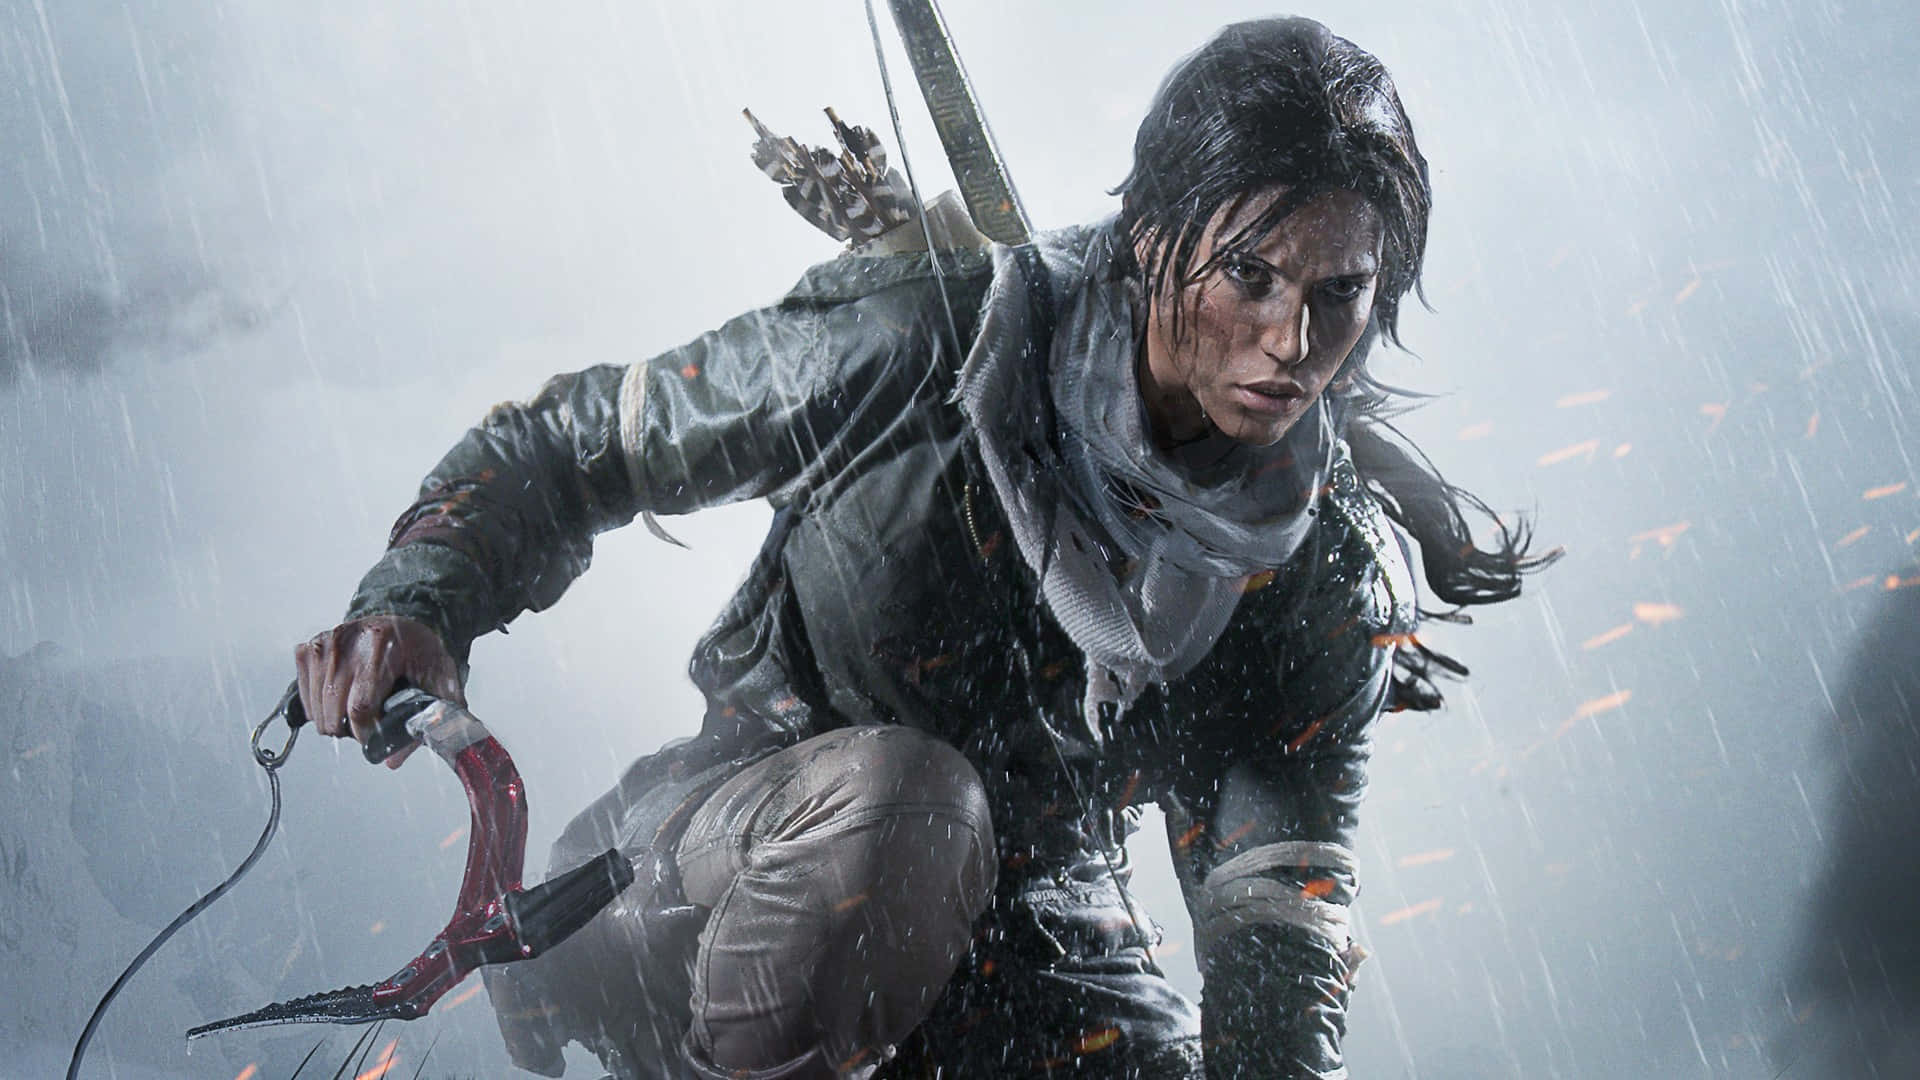 Lara Croft battles the cold of Siberia in Rise of the Tomb Raider